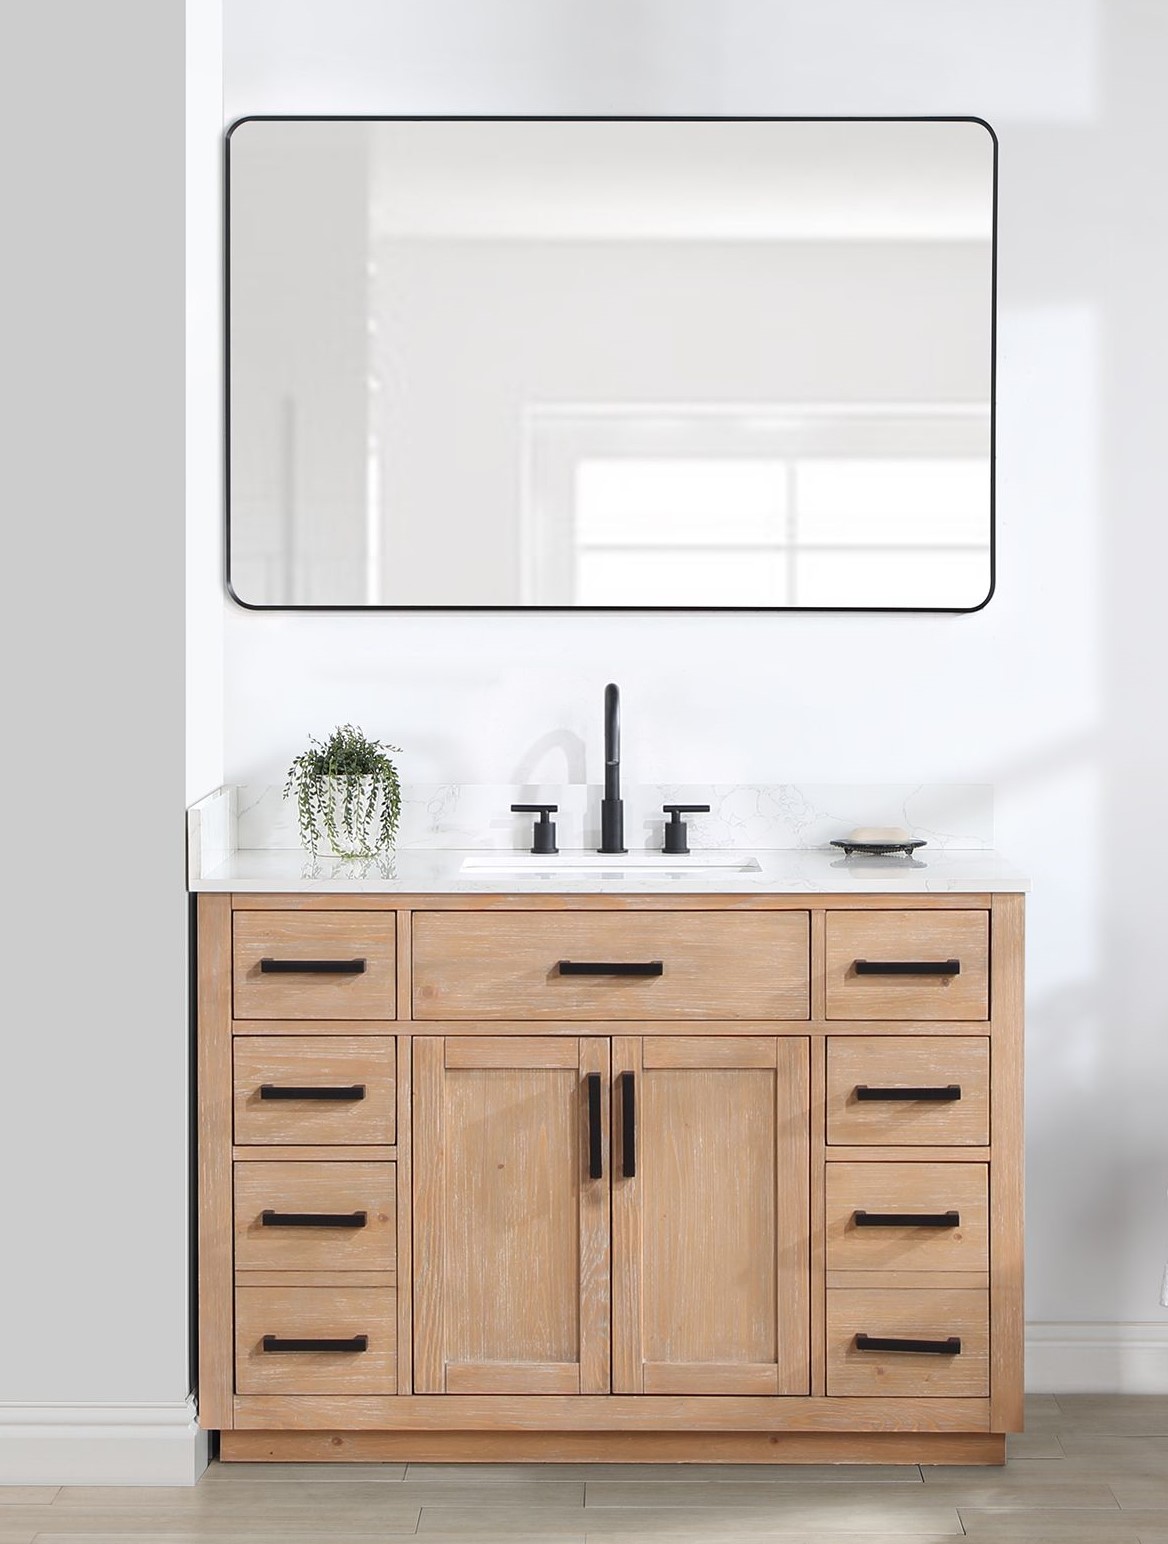 Issac Edwards 48" Single Bathroom Vanity in Light Brown with Grain White Composite Stone Countertop with Mirror